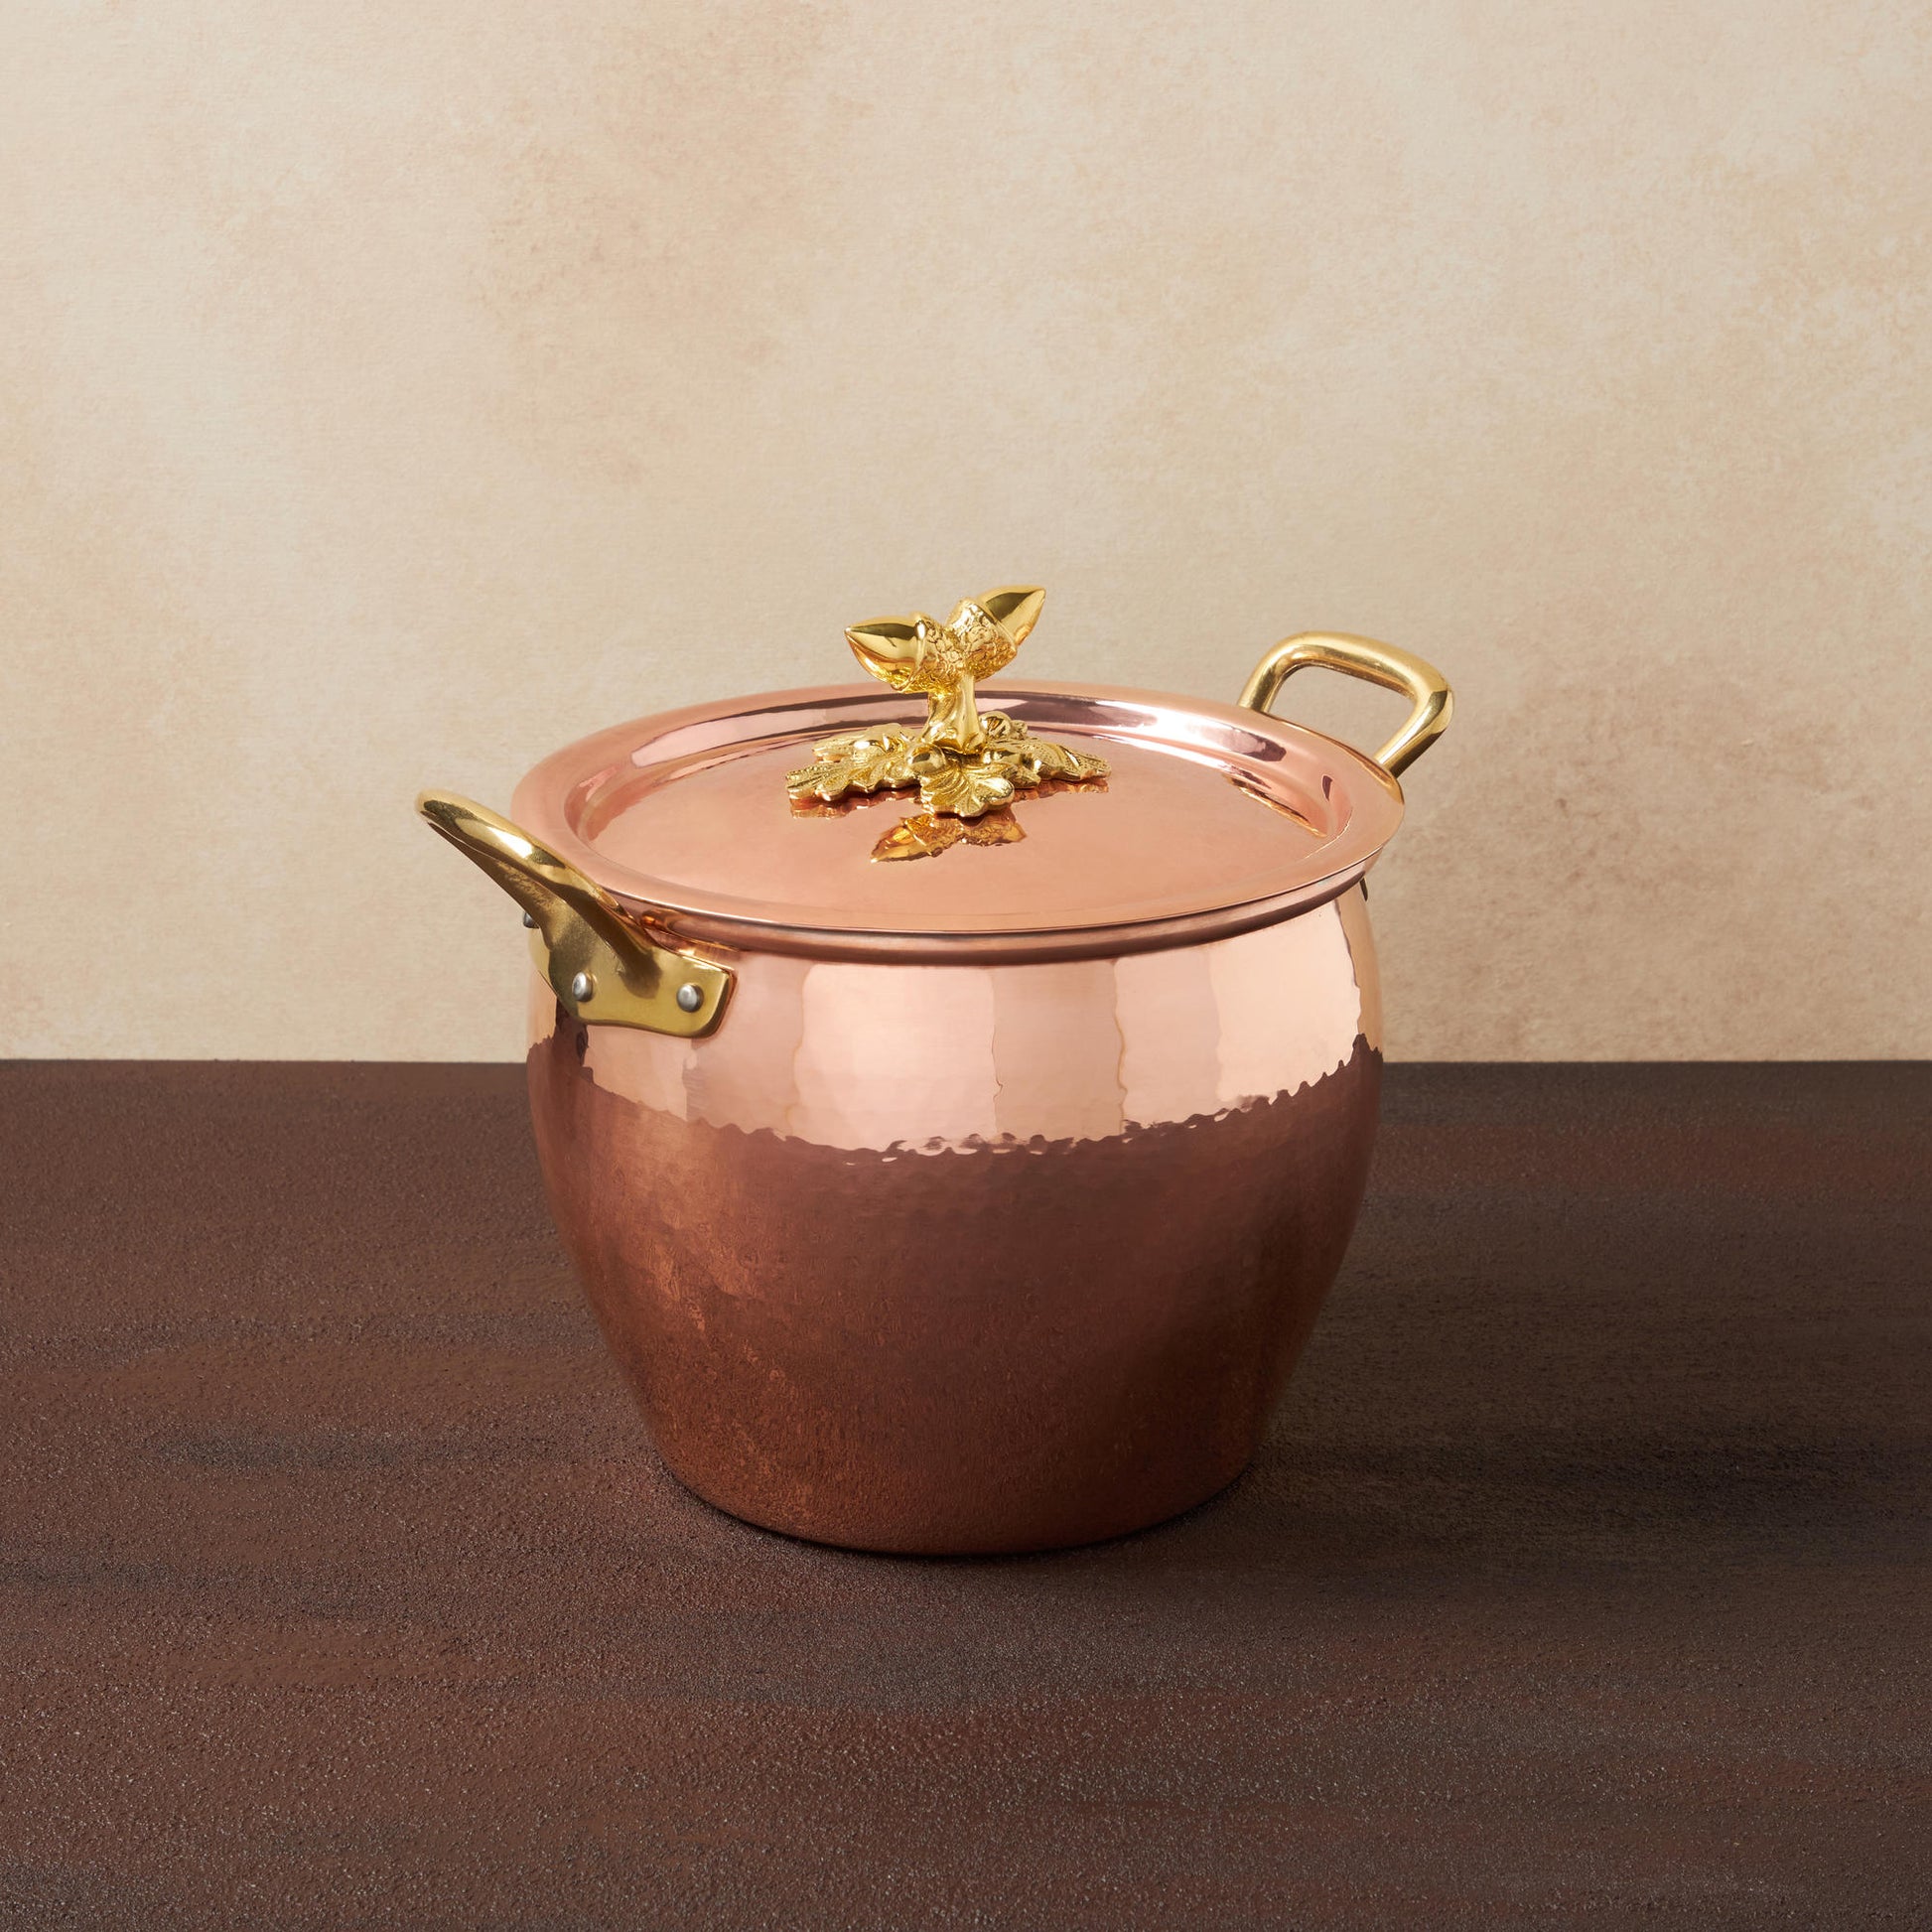 Hammered copper 5 Qt Stockpot  lined with high purity tin applied by hand over fire and bronze handles, from Ruffoni Historia collection